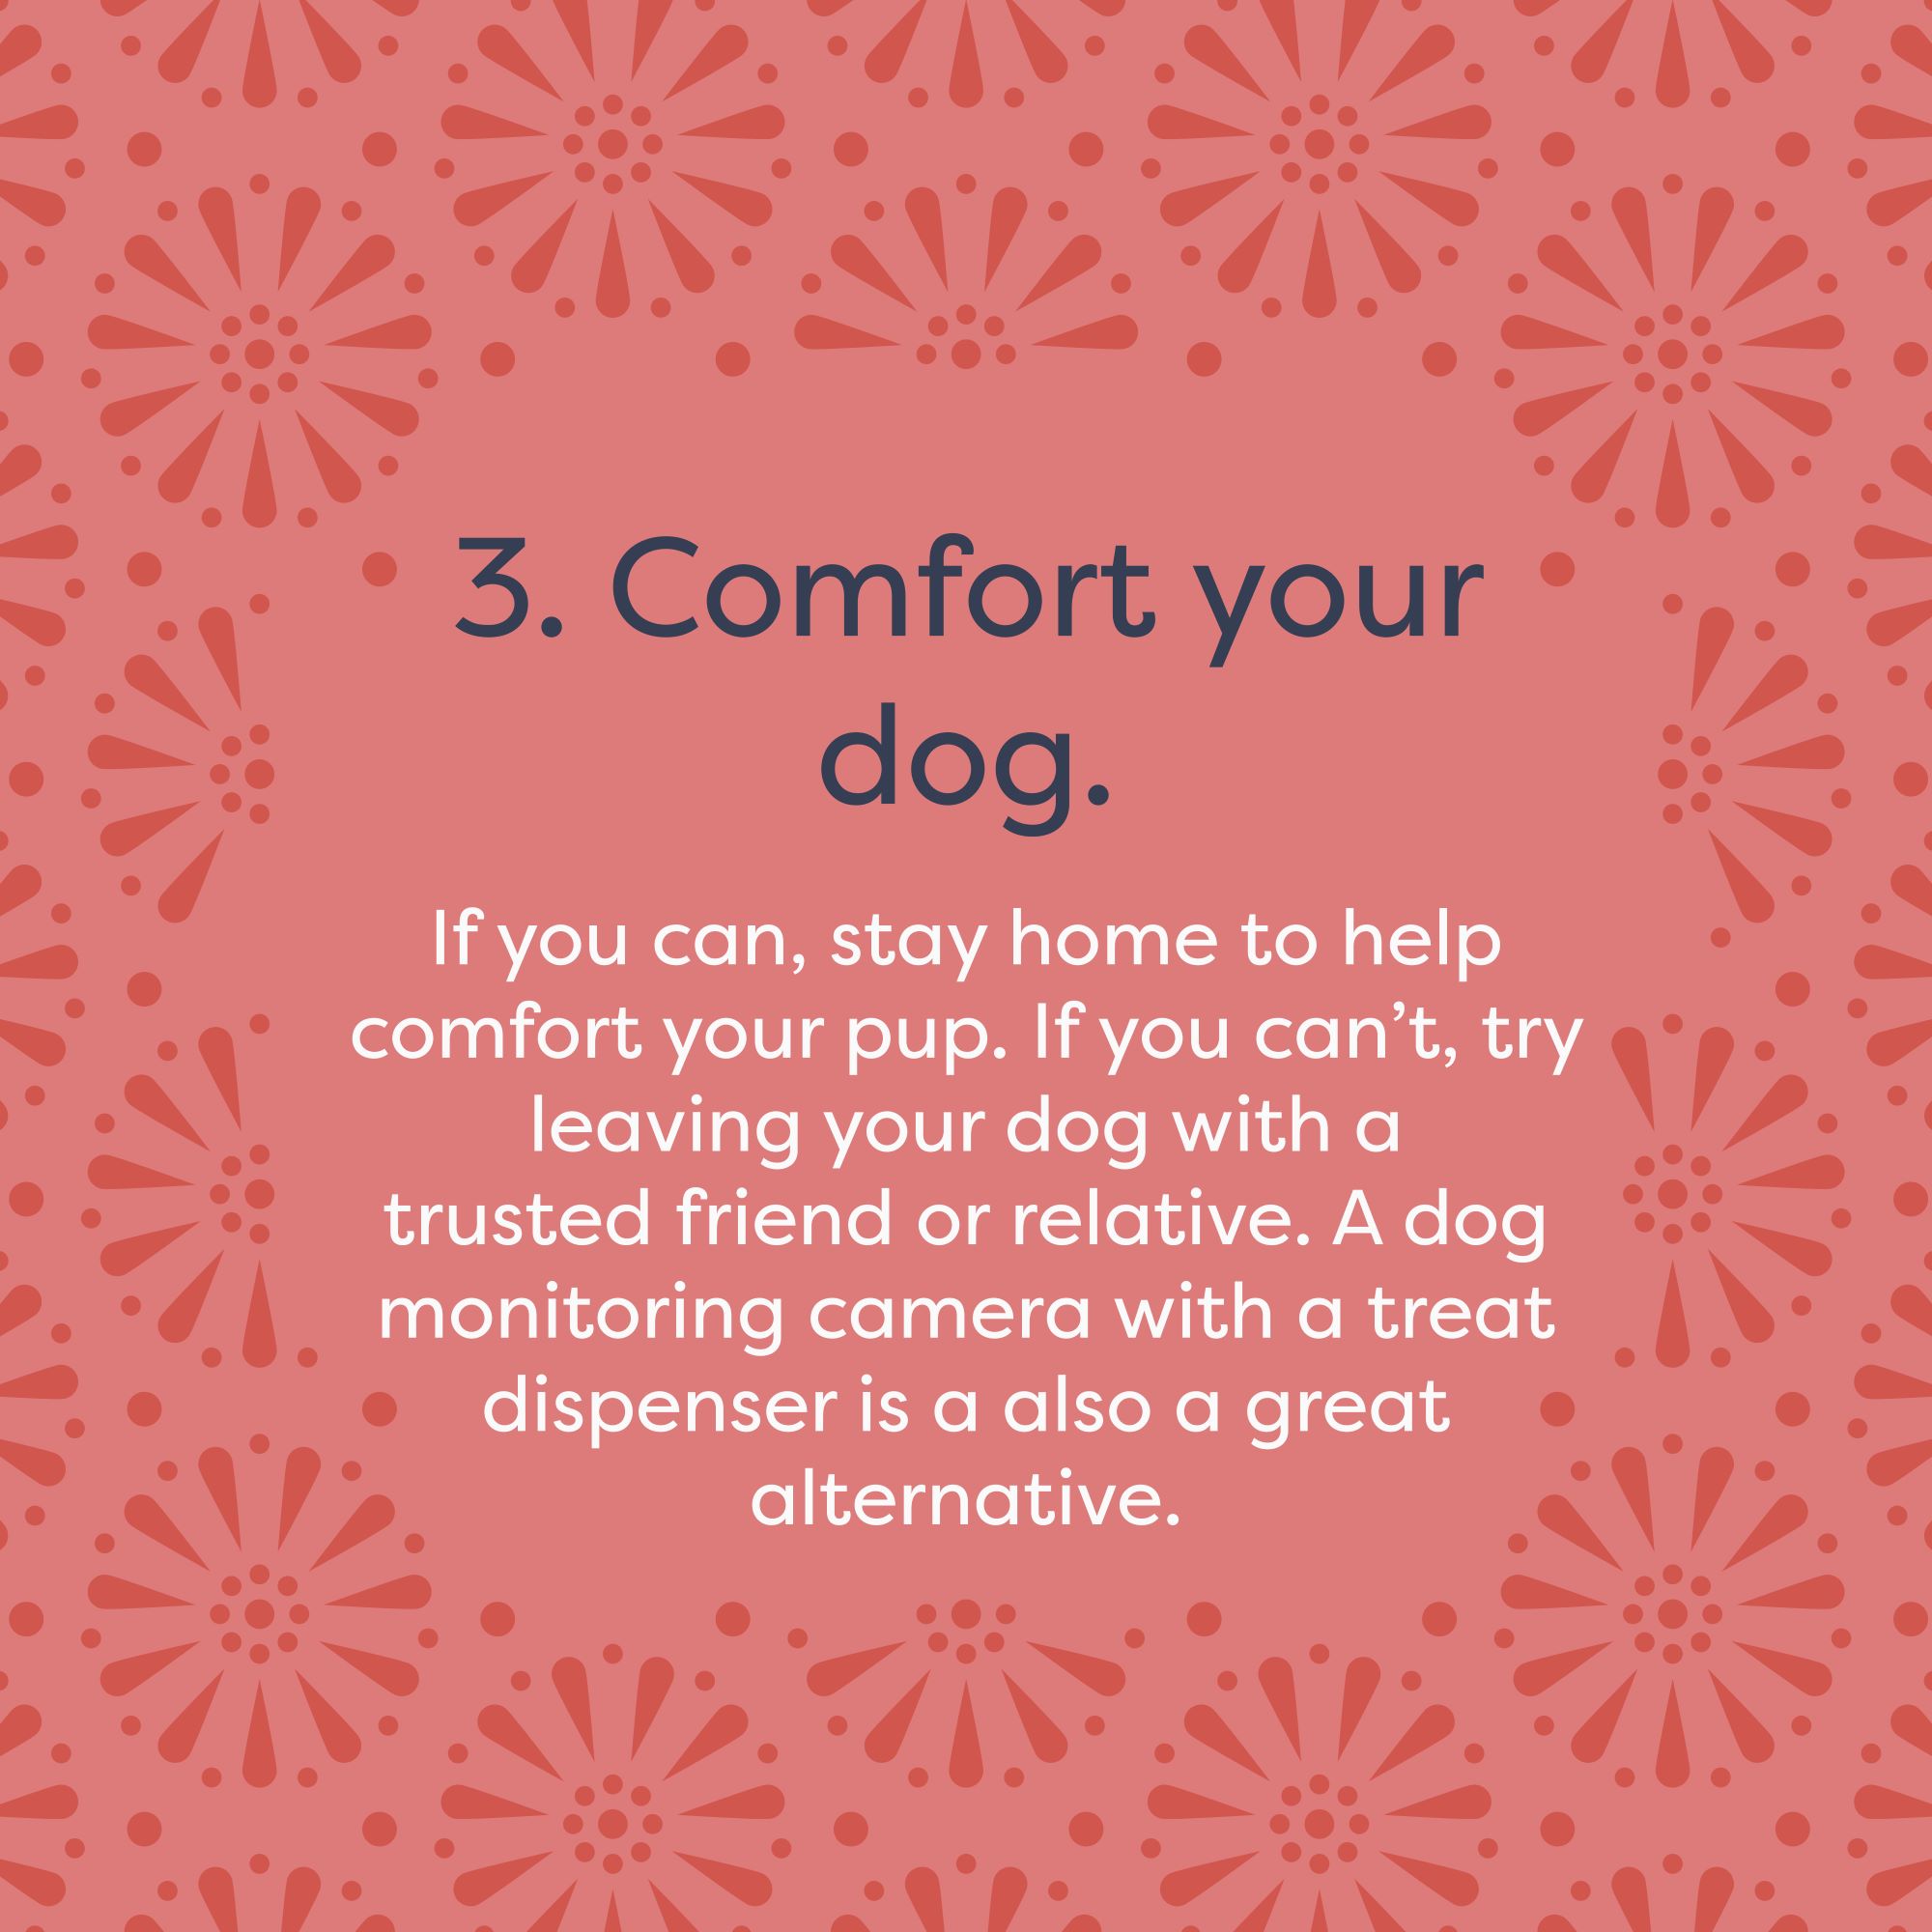 dog firework anxiety tips - comfort your dog